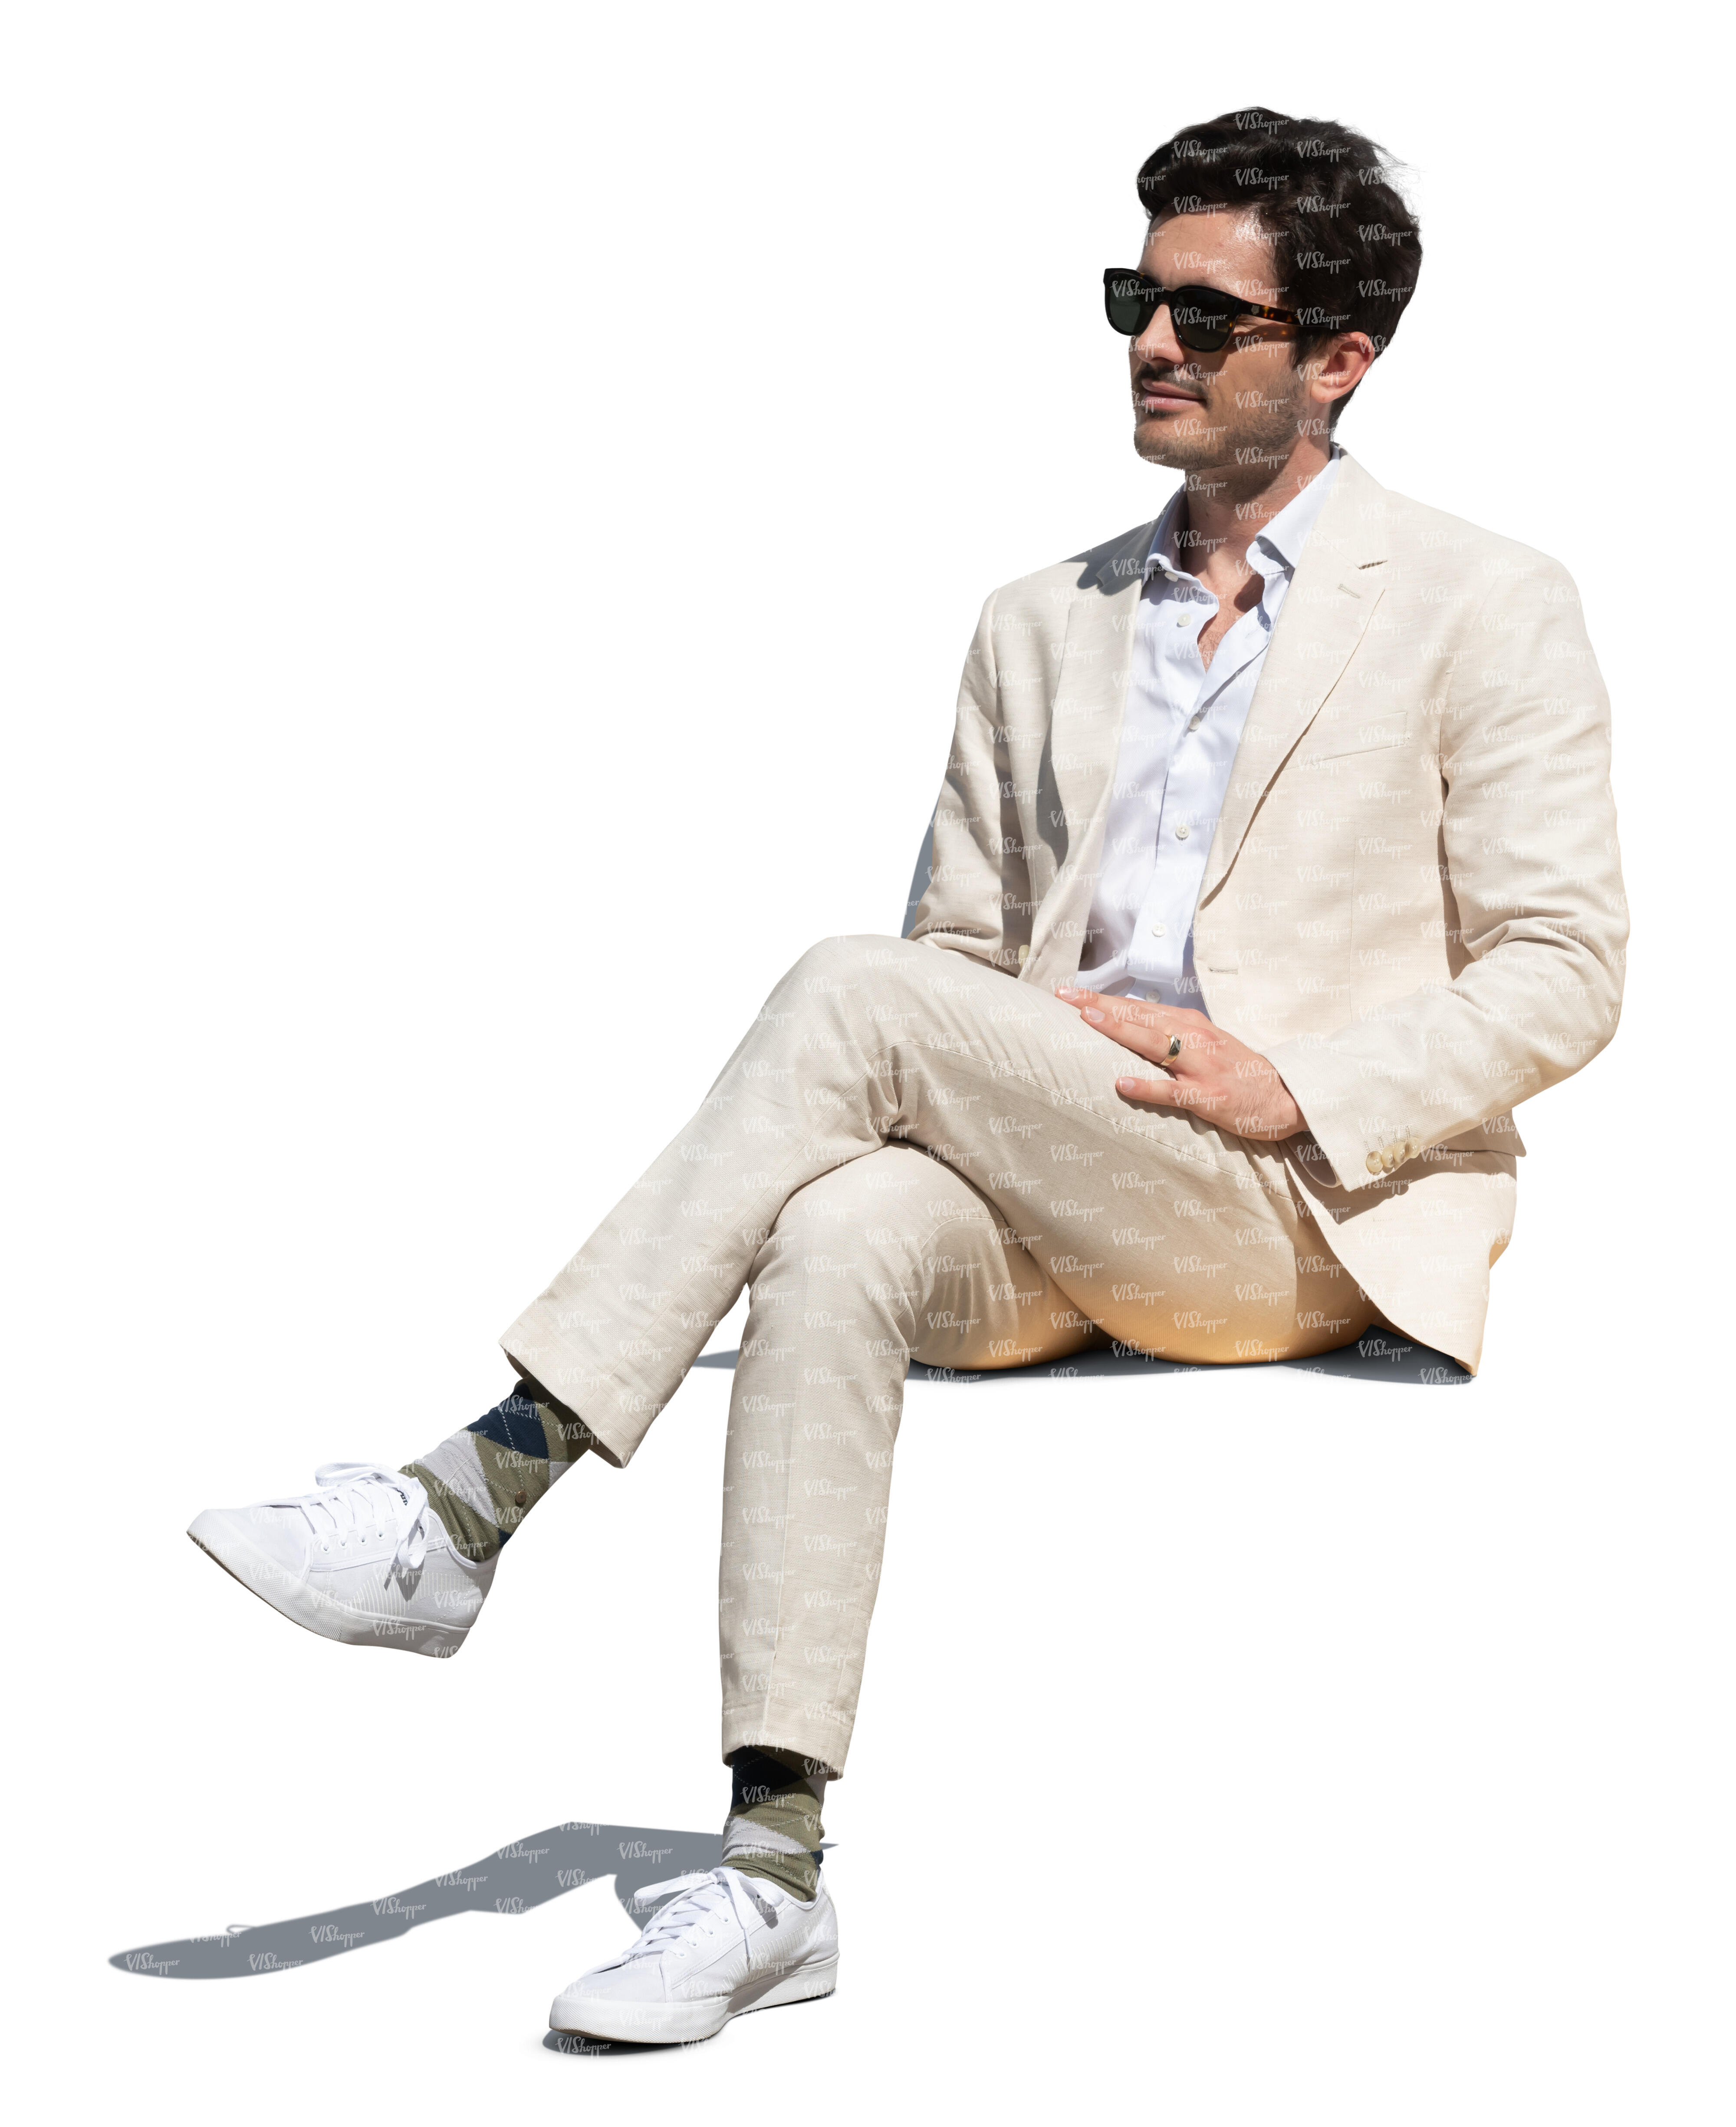 cut out man in a white suit sitting - VIShopper